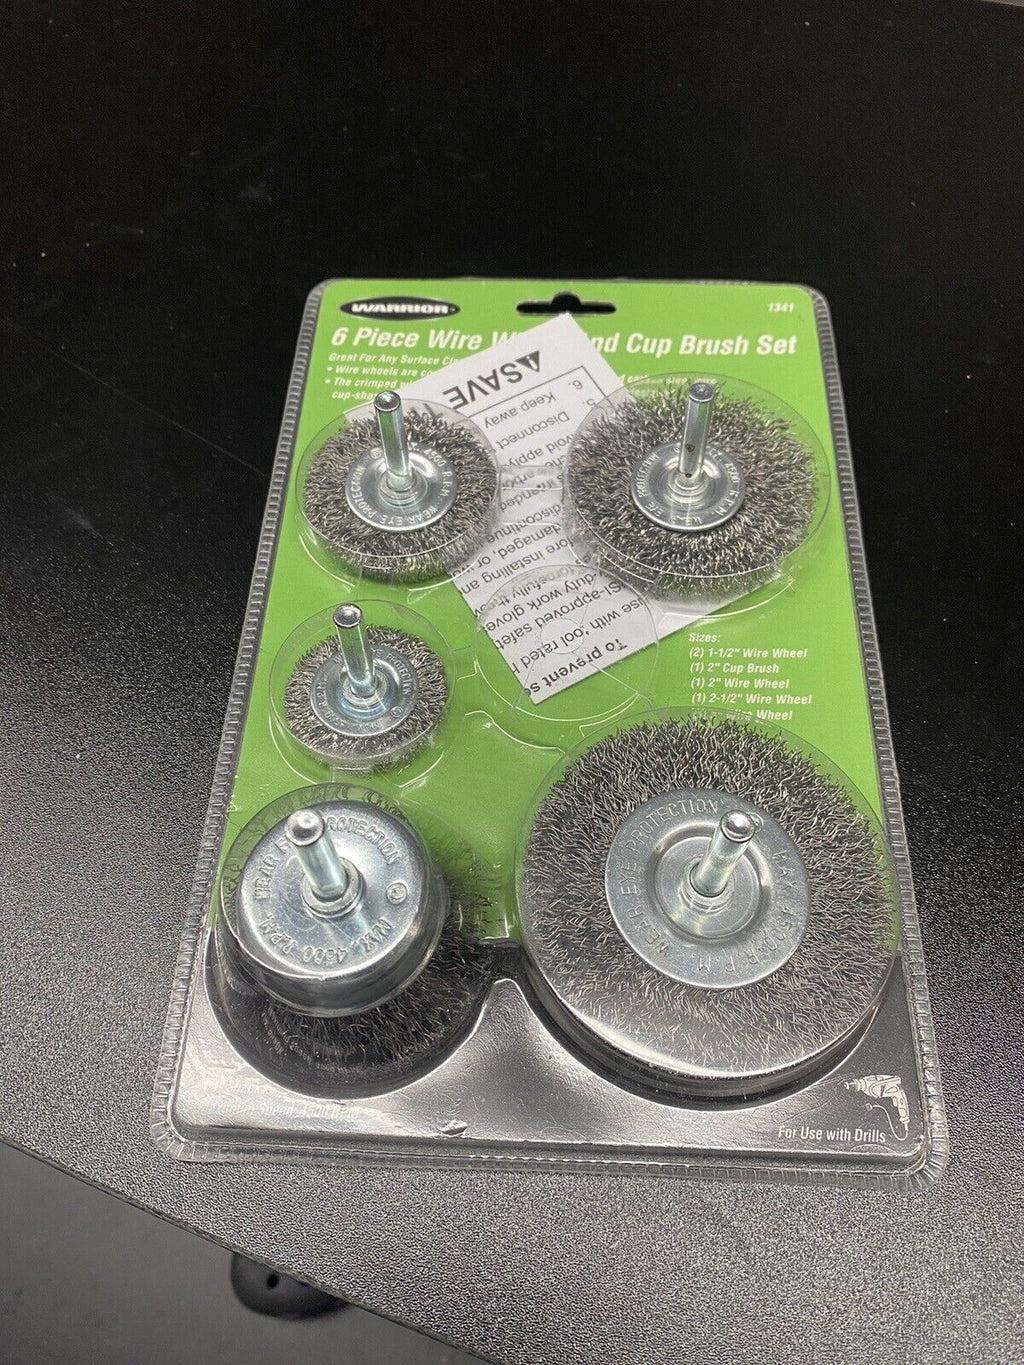 6pc Wire Wheels & Cup Brush Set -1/4" Shank- Item #1341 - Hype Stew Sneakers Detroit